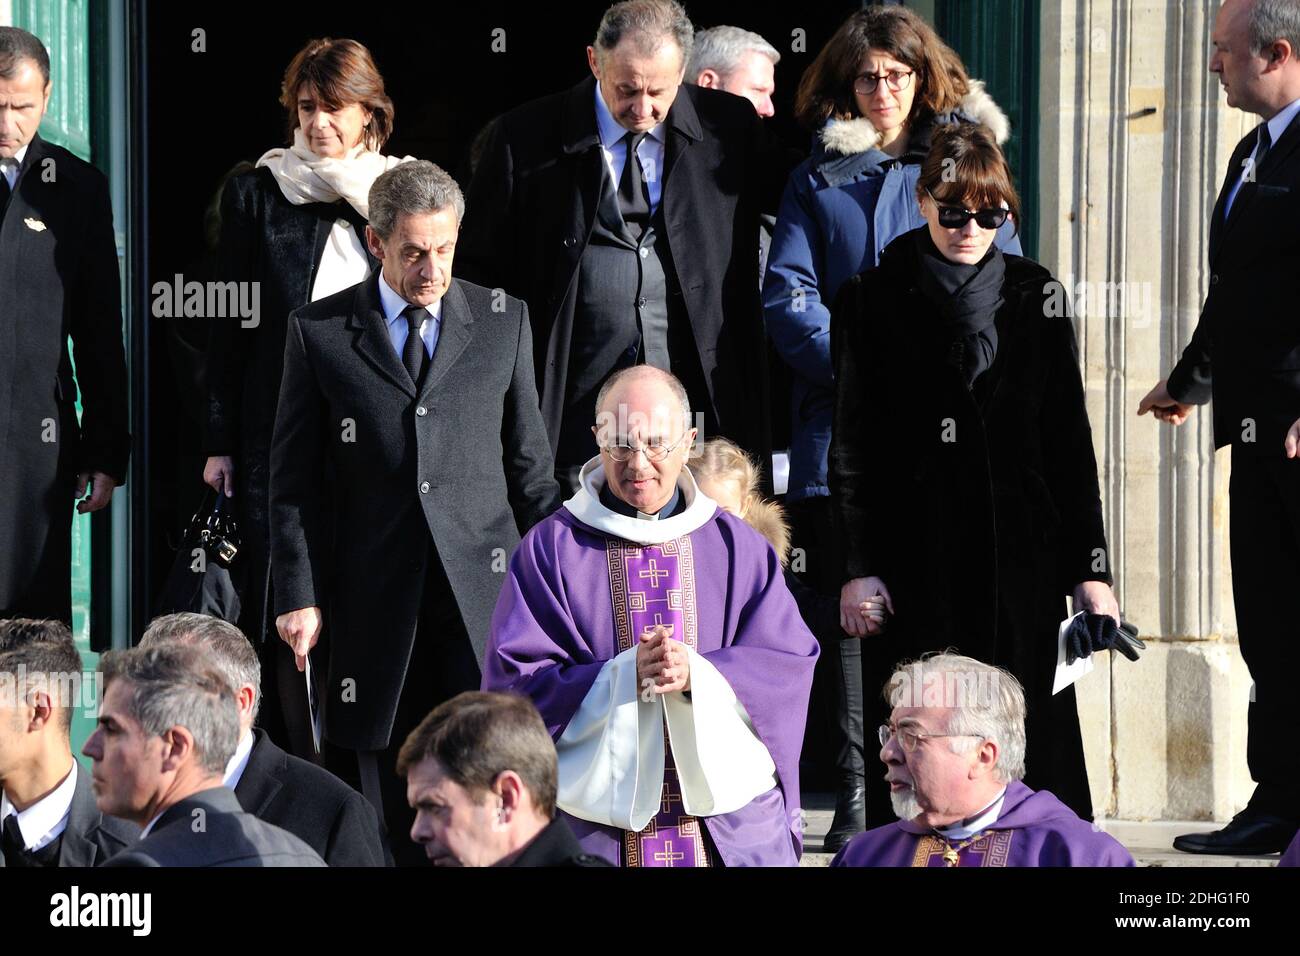 Francois Sarkozy, Nicolas Sarkozy, Carla Bruni-Sarkozy and their daughter during the funeral of Andree Sarkozy aka Dadue, mother of Former French President Nicolas Sarkozy, at Saint-Jean-Baptiste church in Neuilly-Sur-Seine, France on December 18, 2017. Photo by ABACAPRESS.COM Stock Photo